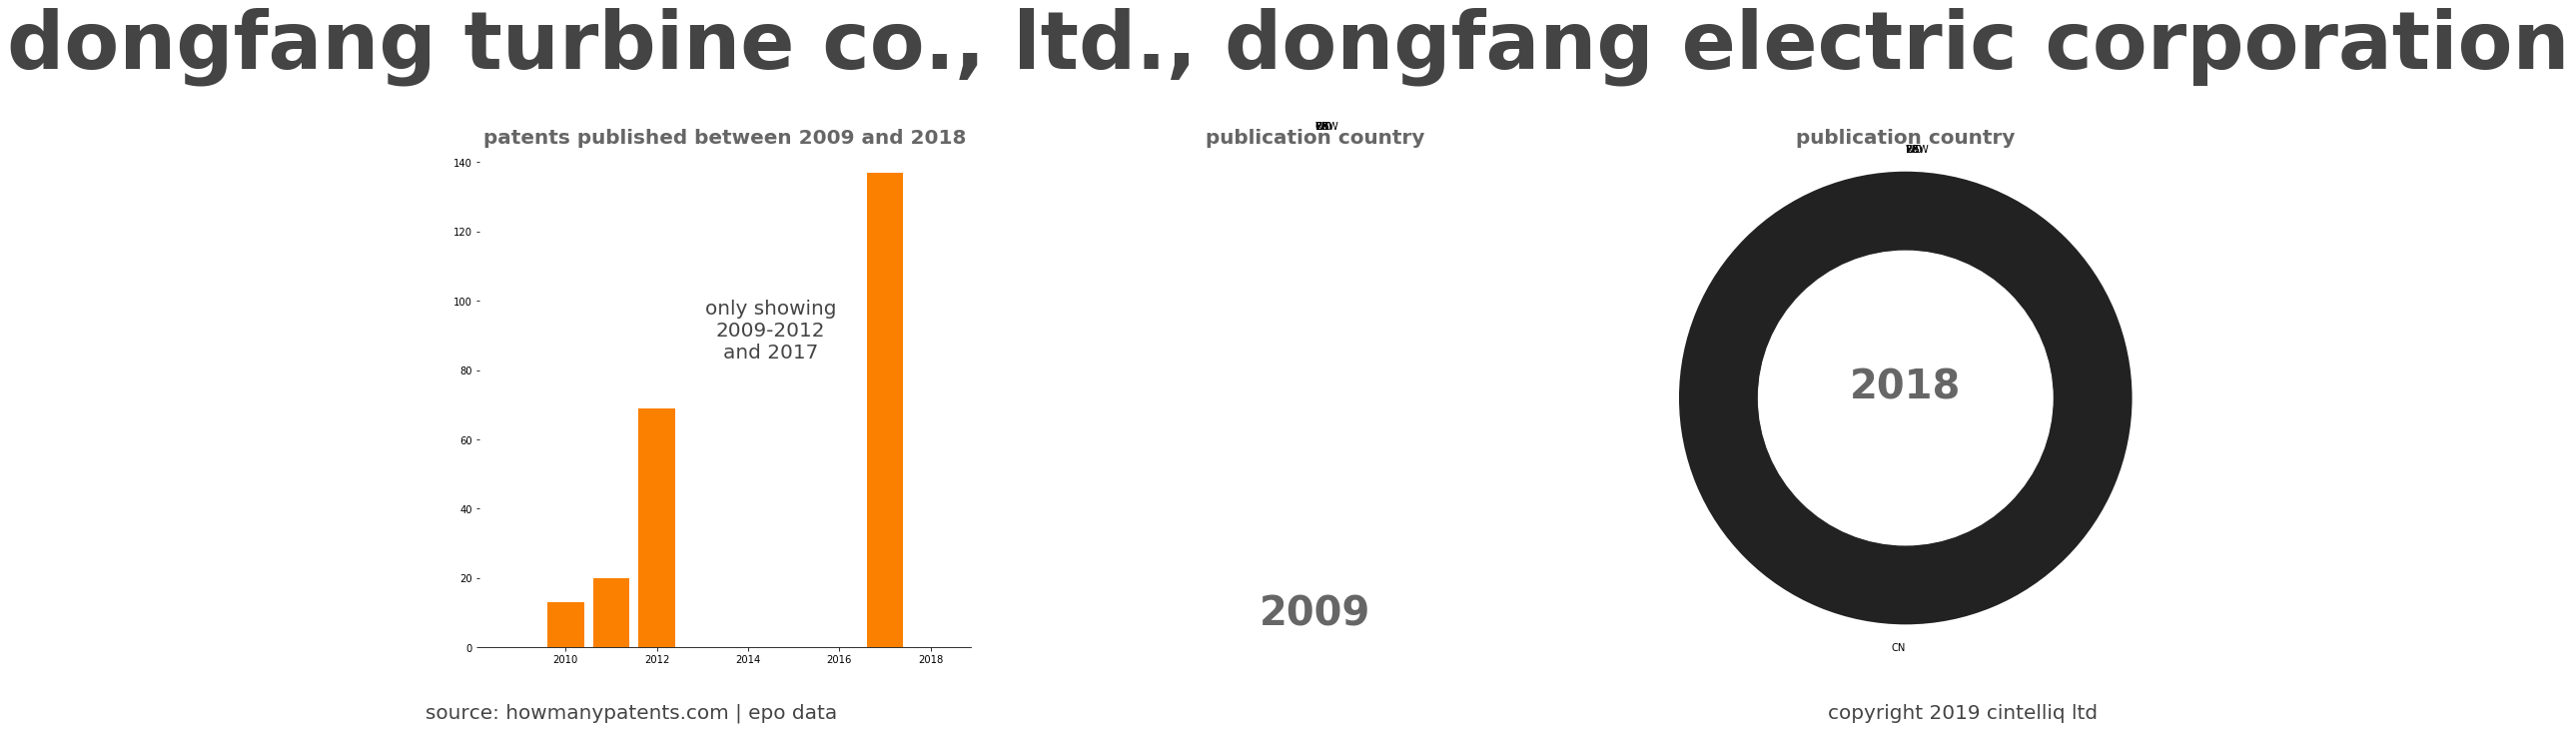 summary of patents for Dongfang Turbine Co., Ltd., Dongfang Electric Corporation